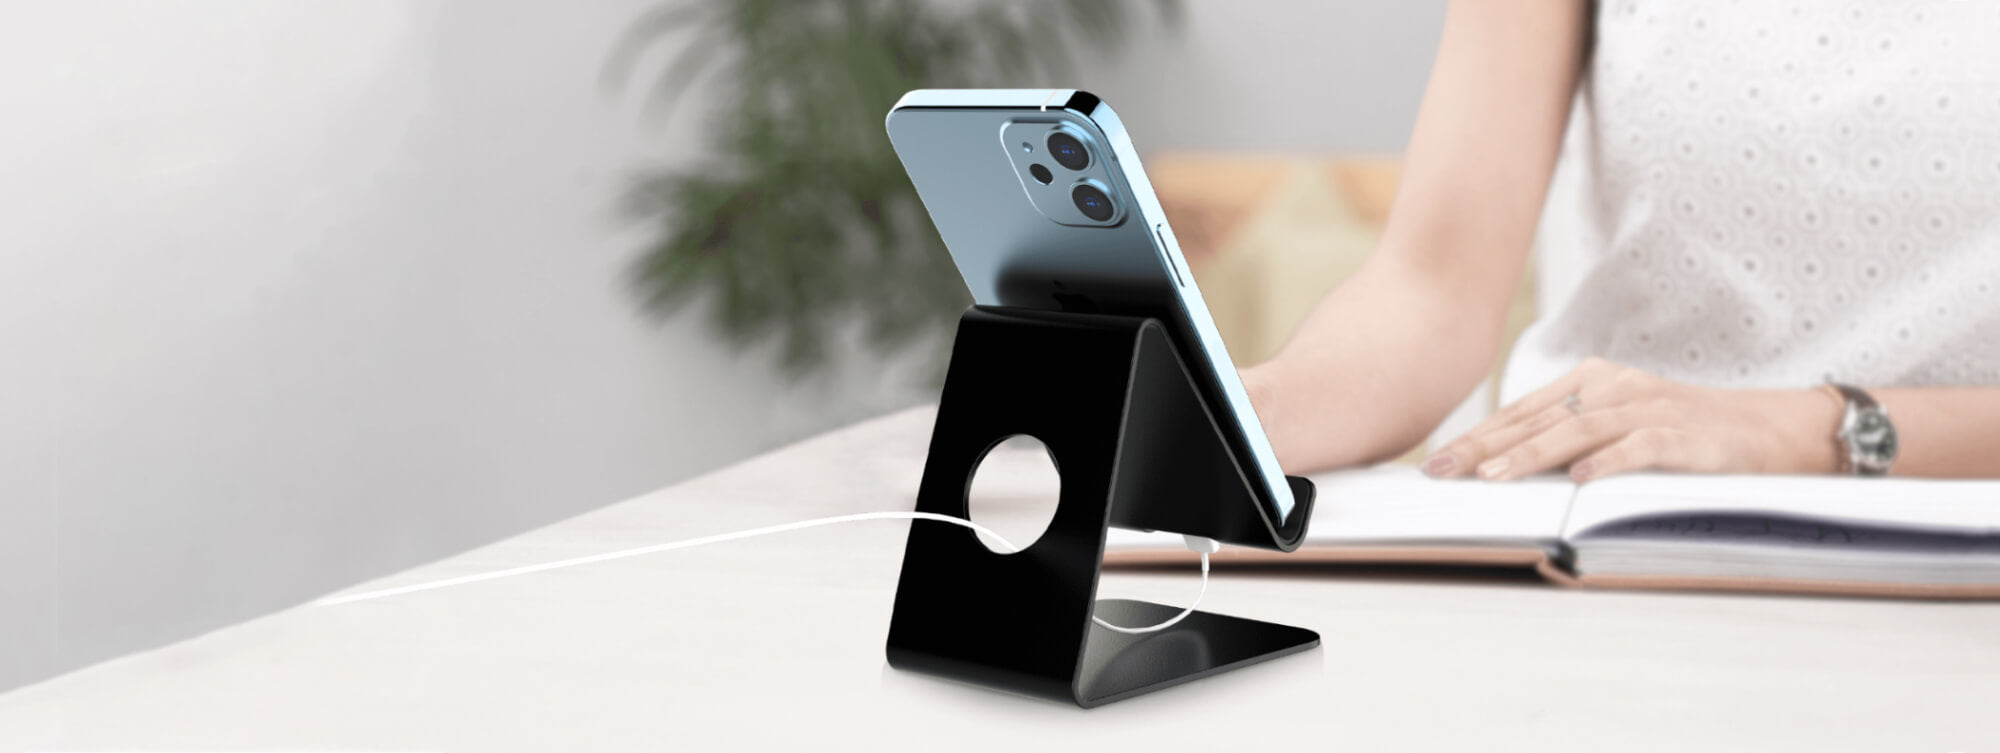 mobile phone stands